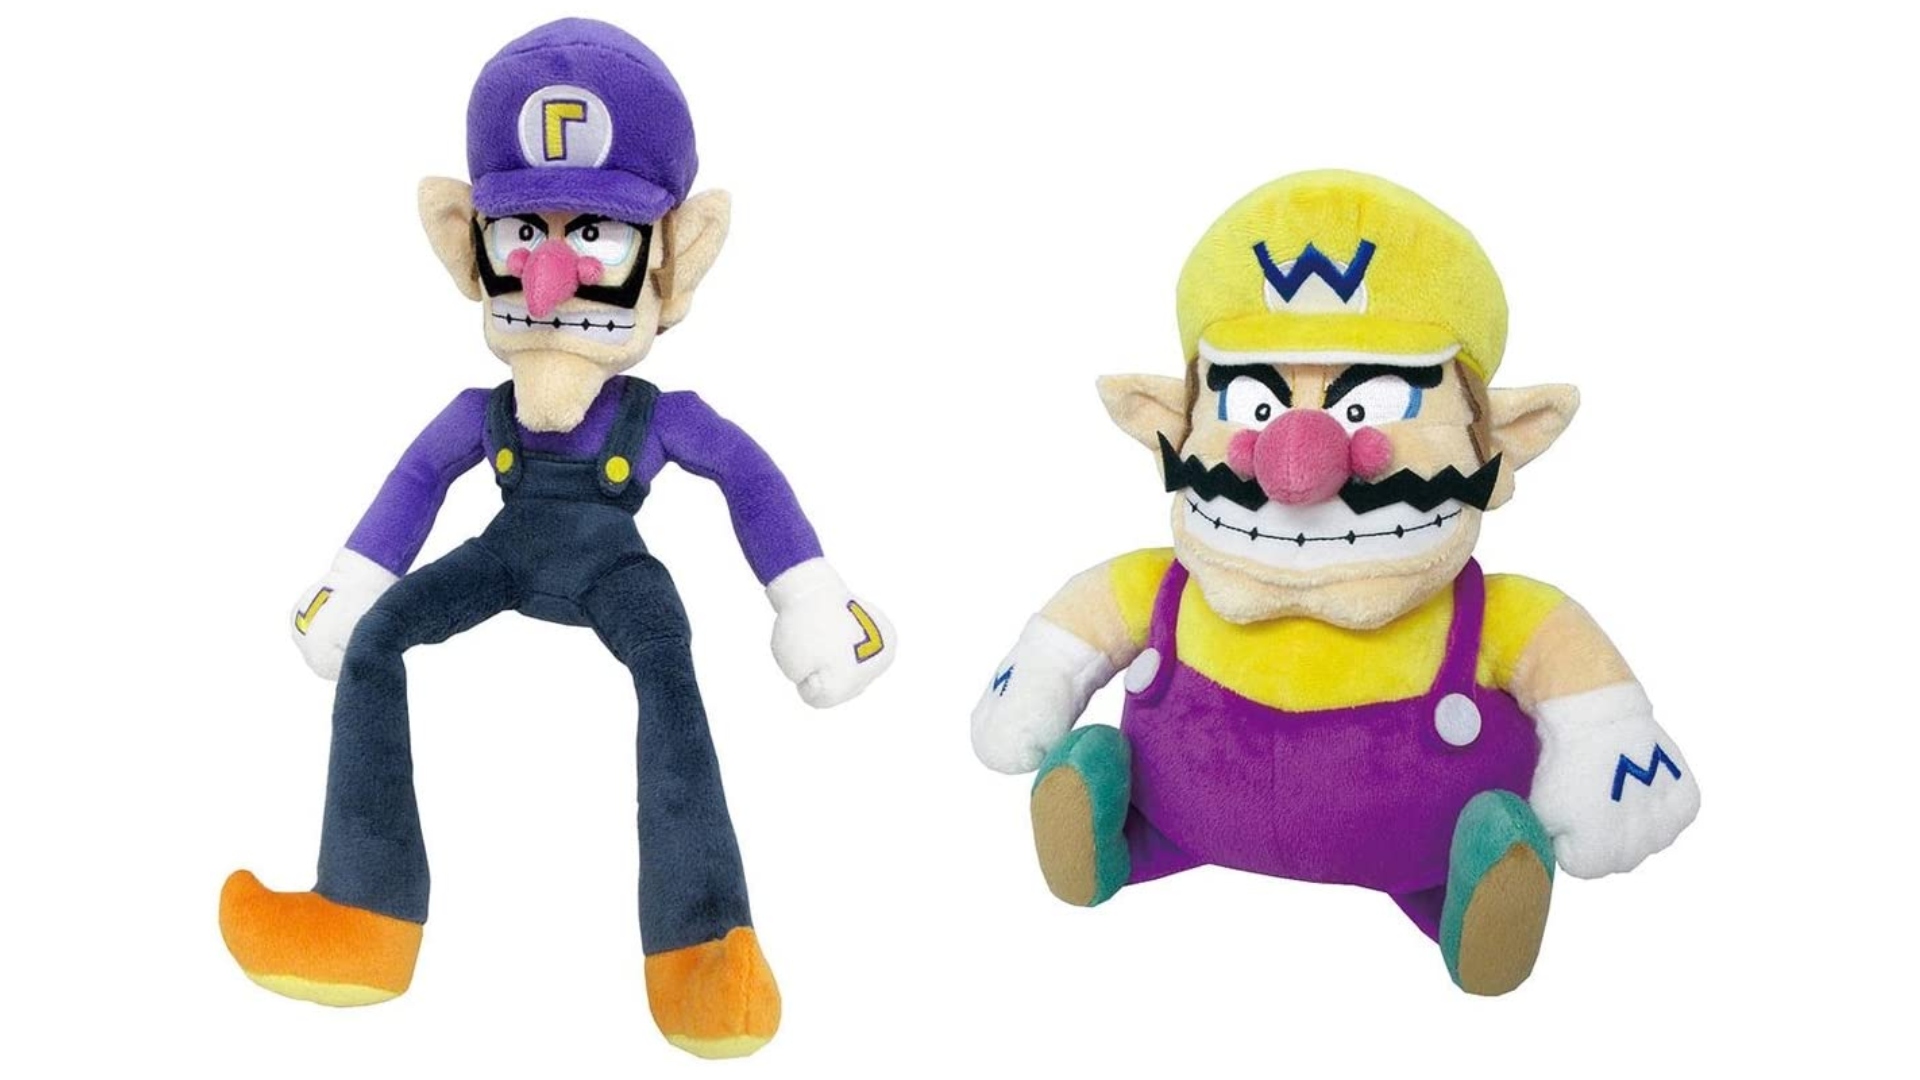 Nintendo gifts: image shows Wario and Waluigi plush toys side by side.